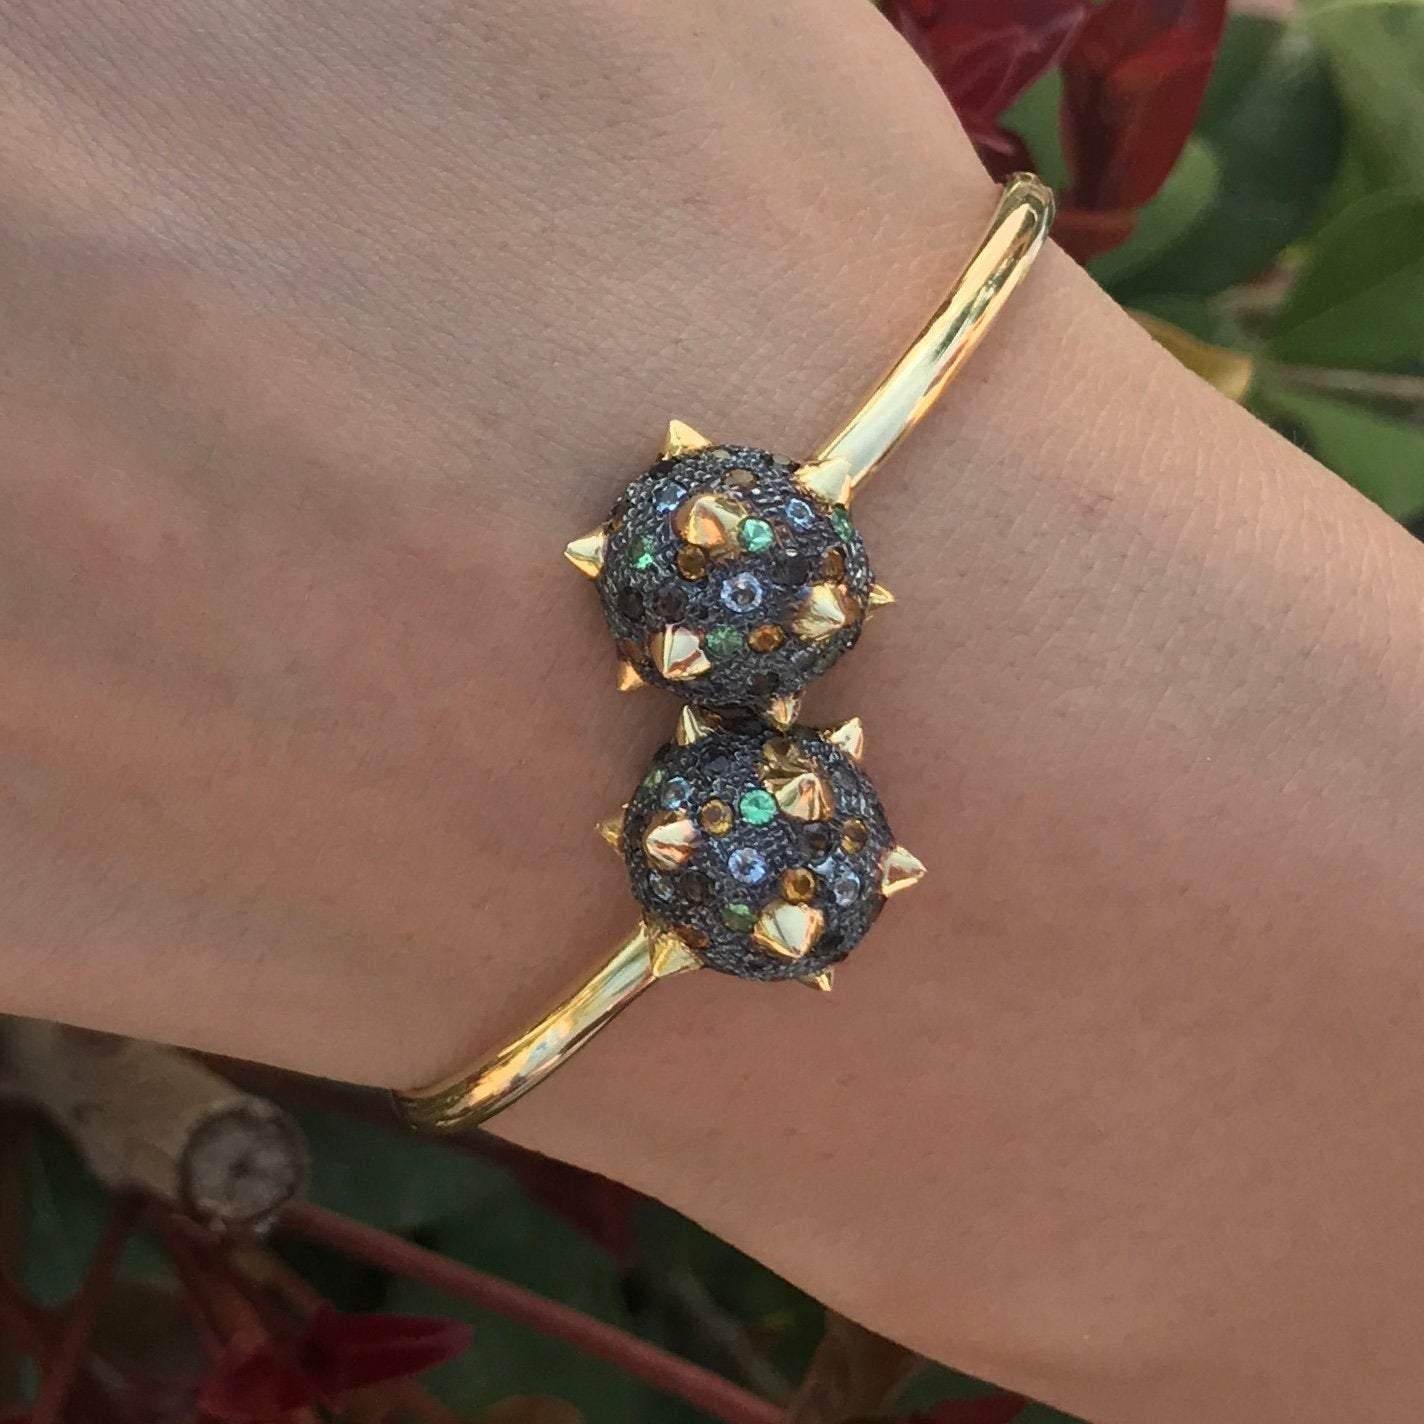 The ‘Black Morning Star’, flexible cuff is crafted in 18K yellow gold and blackened gold, hallmarked in Cyprus. This Stunning cuff bracelet comes in a highly polished and textured blackened finish and features 0,46 Cts Blue Topazes, 0,42 Cts